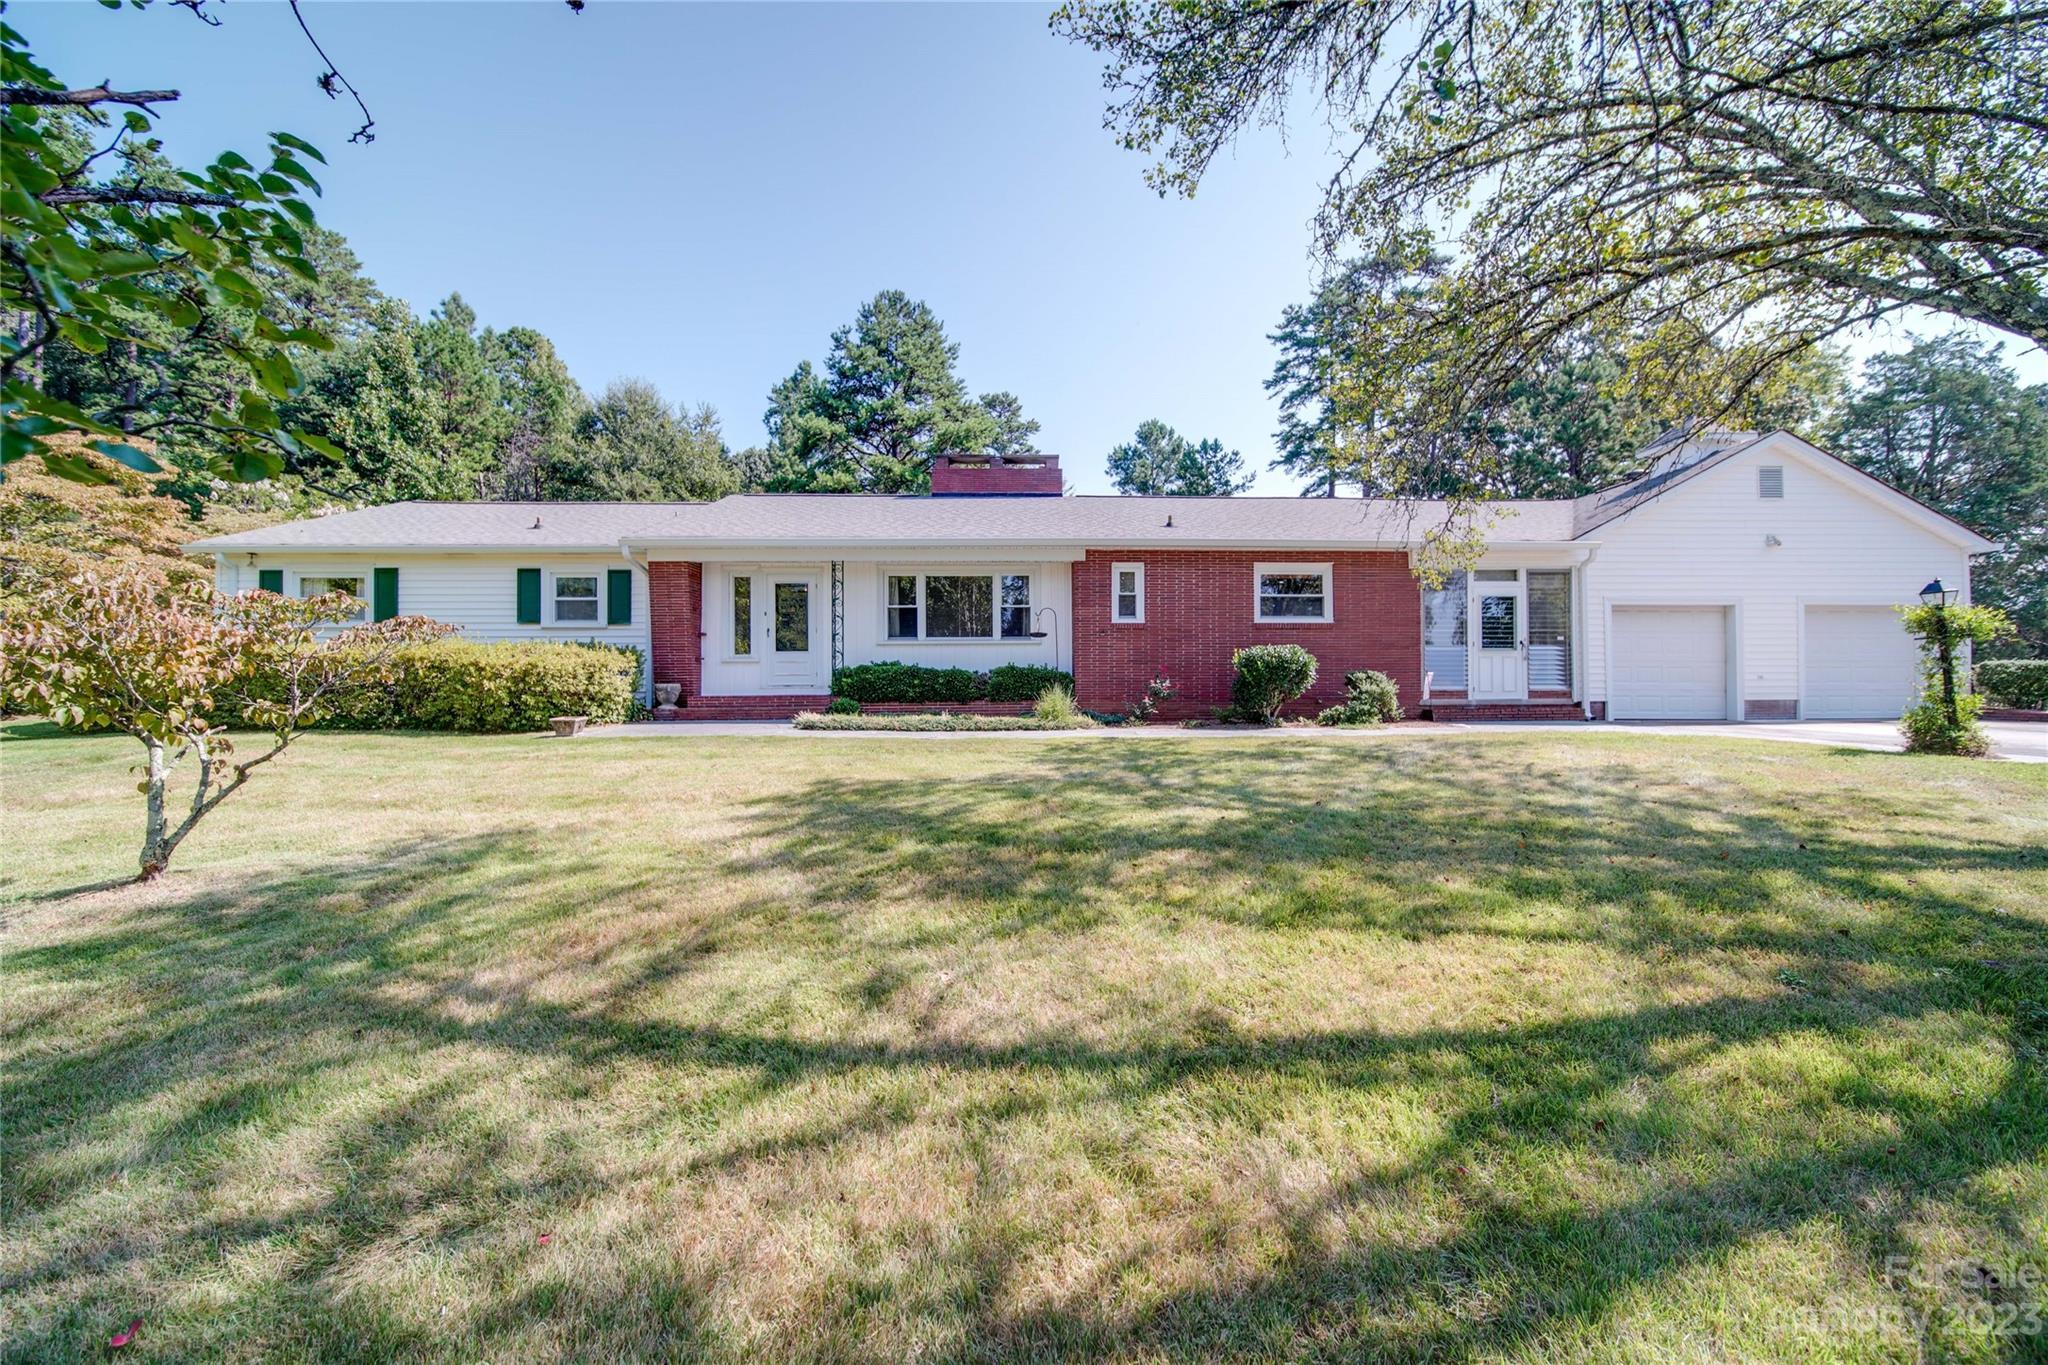 Photo one of 1111 Stanley Lucia Rd Mount Holly NC 28120 | MLS 4097348